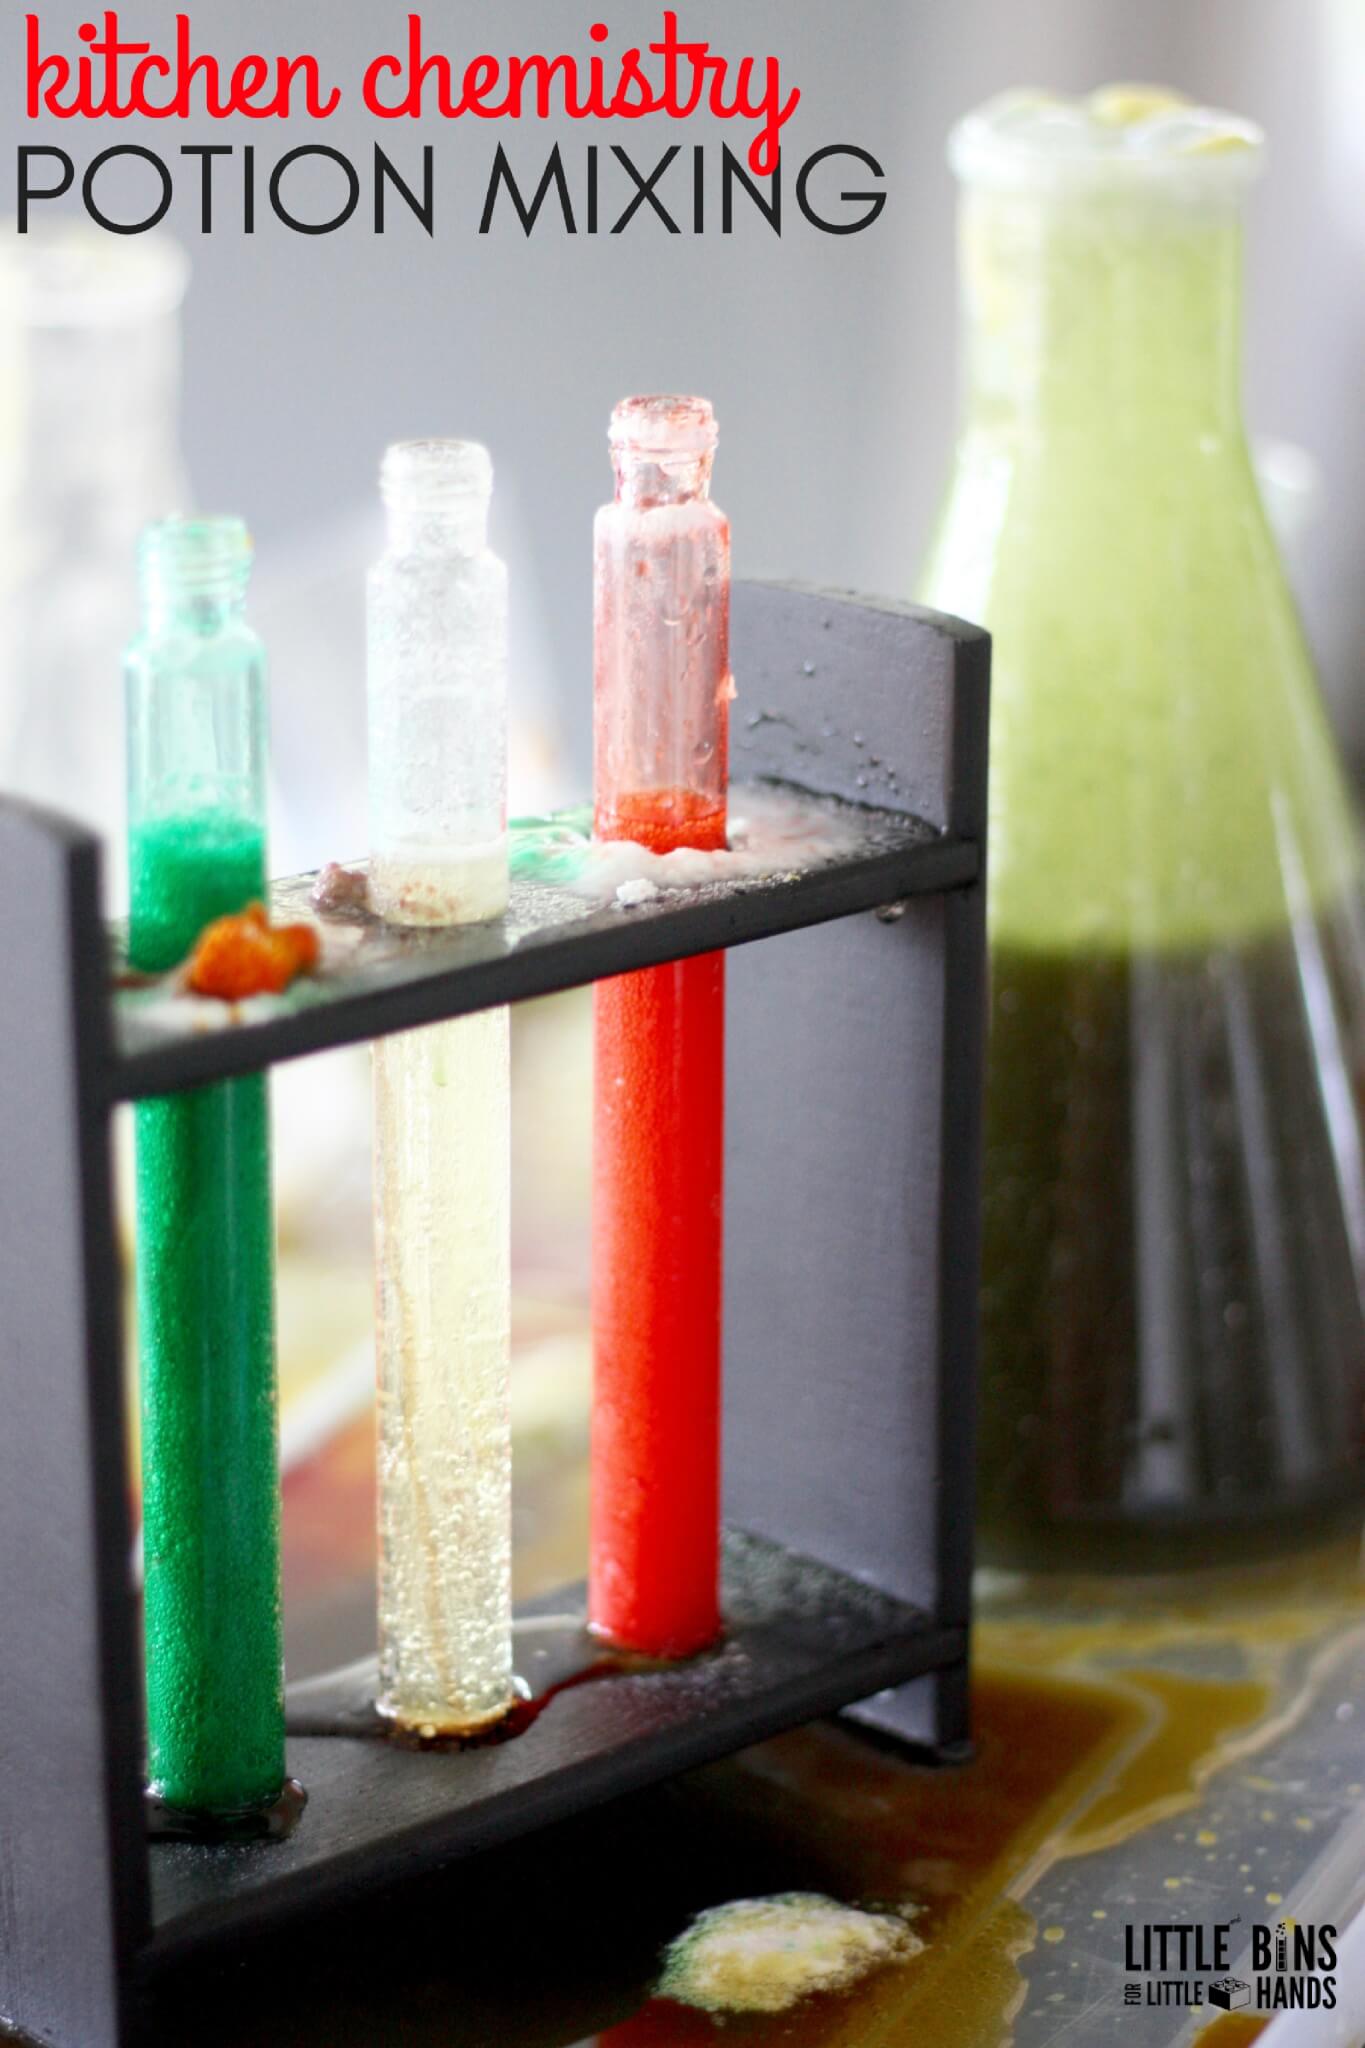 Mixing Potions Science Activity Table for Kitchen Chemistry